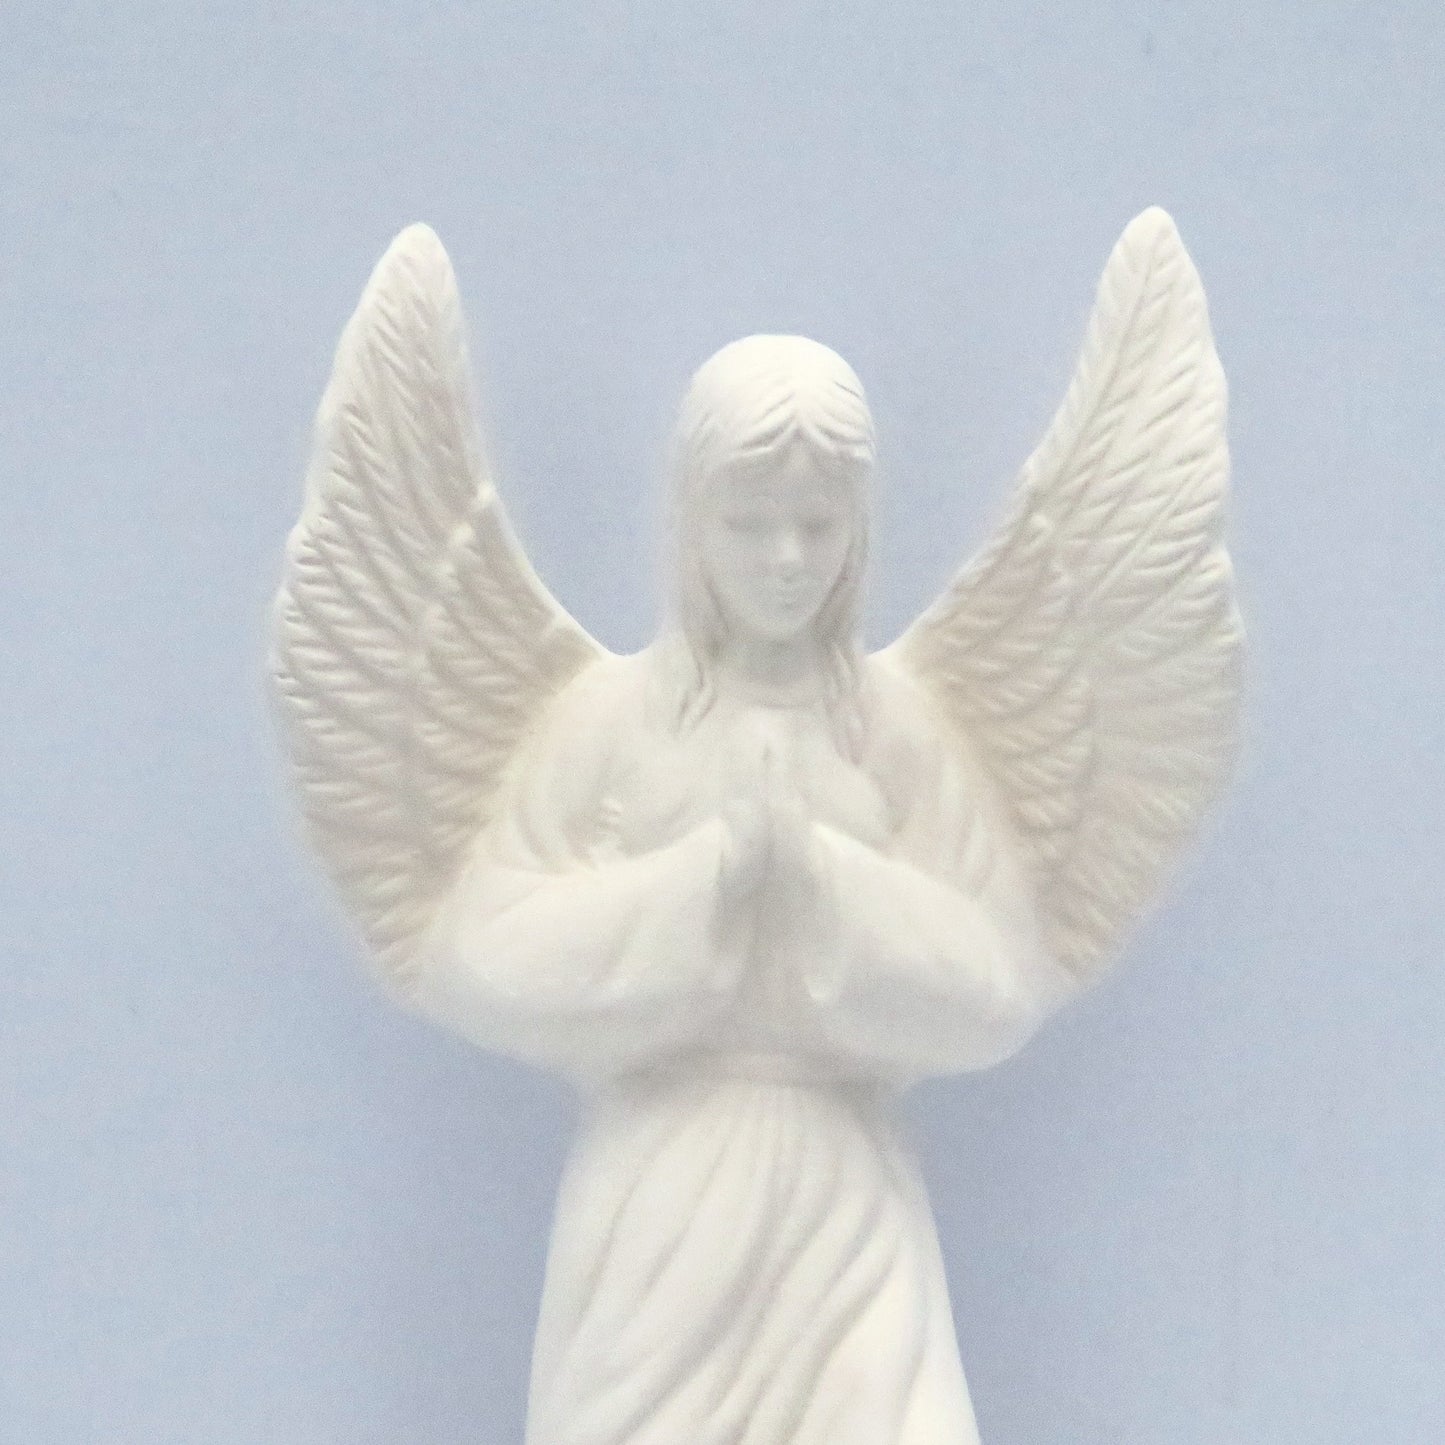 close up of upper section of unpainted praying ceramic angel statue